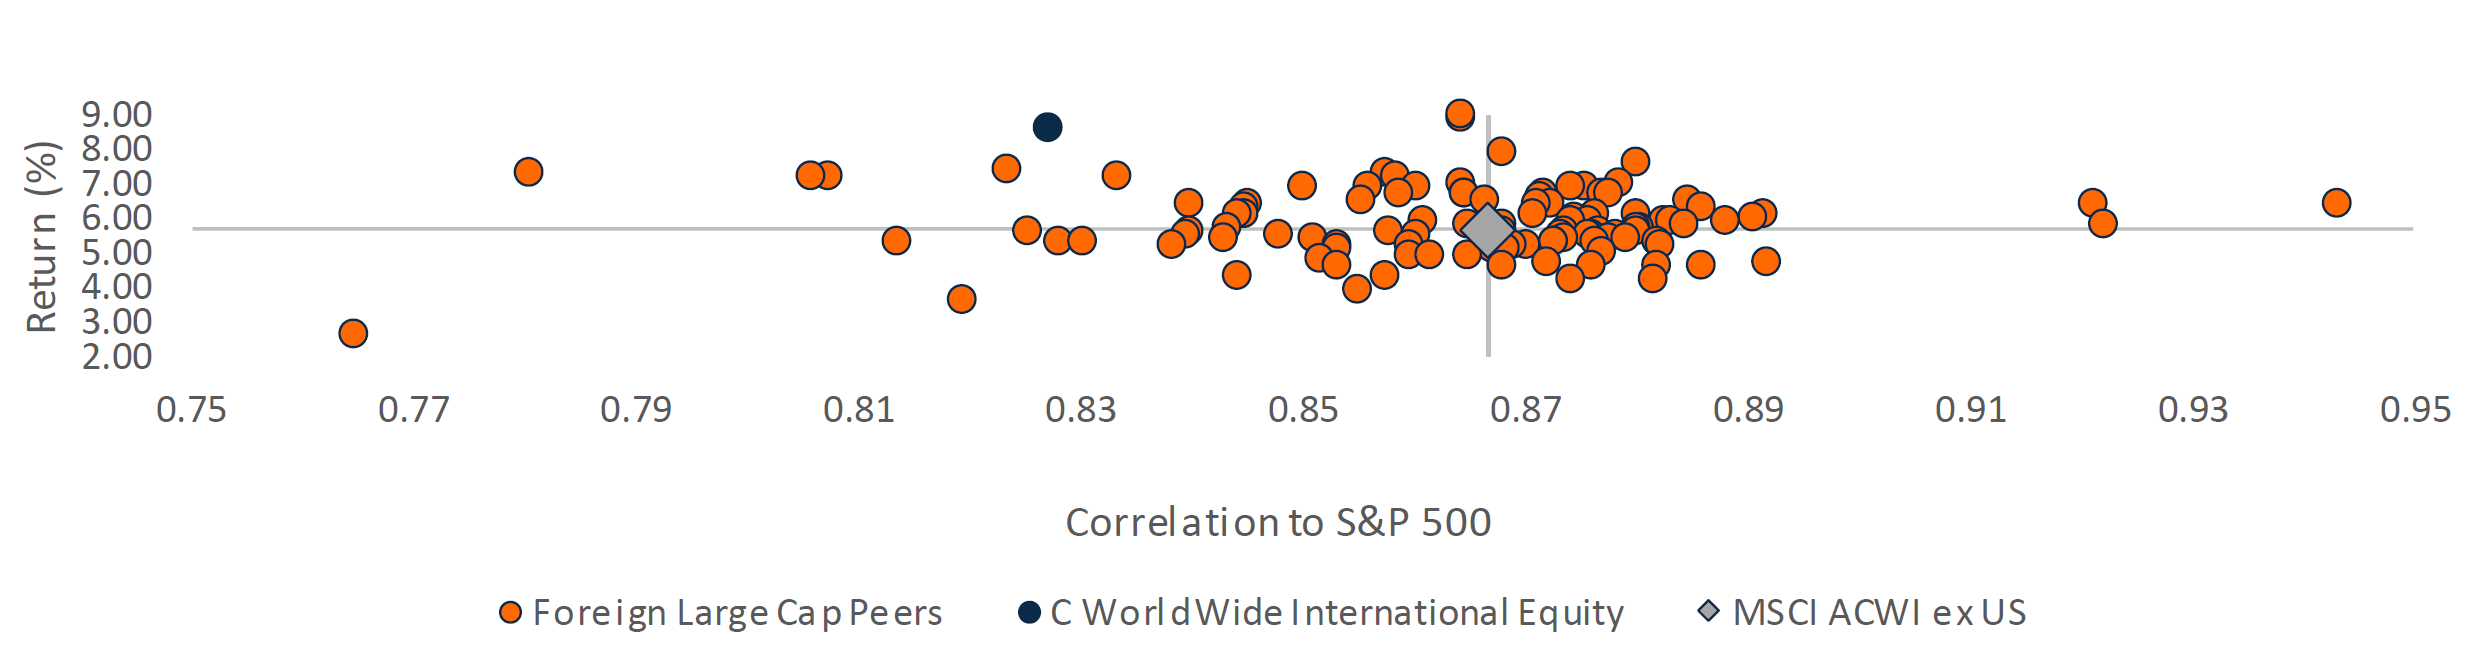 20YR Annualized Return vs. Correlation to S&P 500 Related Performance CWW International Equity, Foreign Large Cap Peers, MSCI ACWI ex -US Trailing 20 Years Ending 12/31/2023